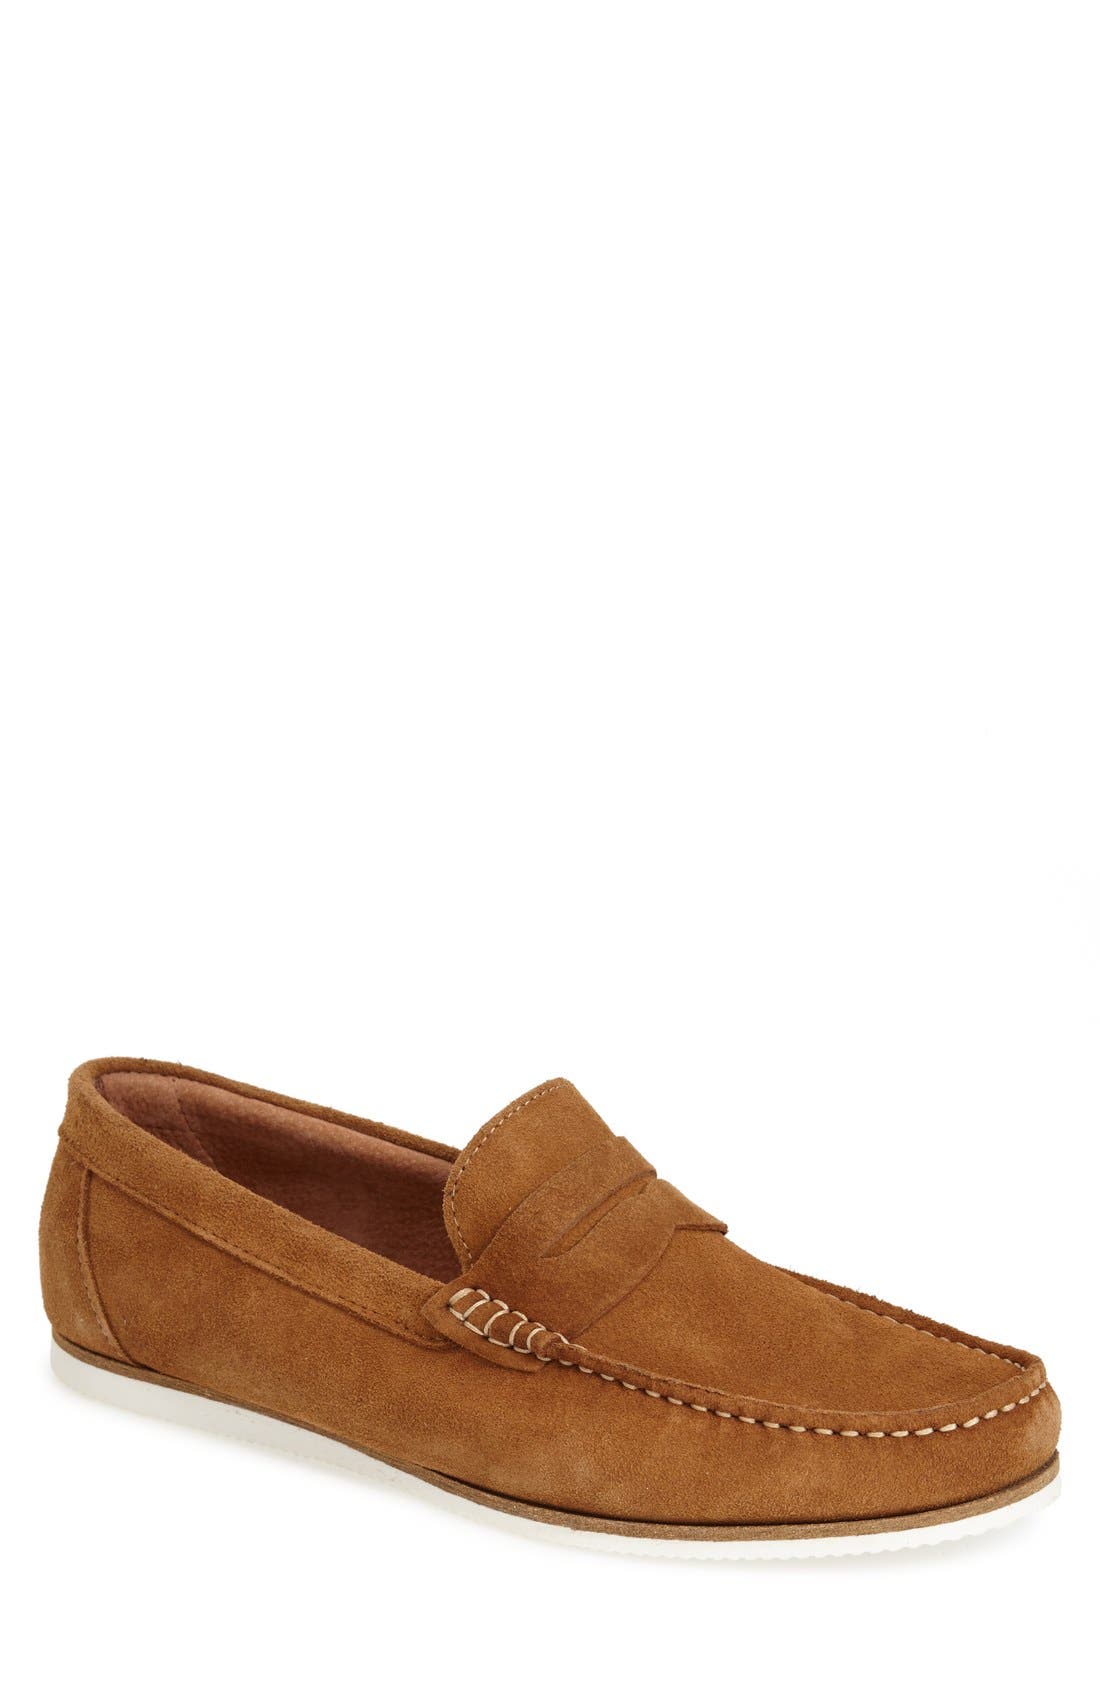 dune loafers mens